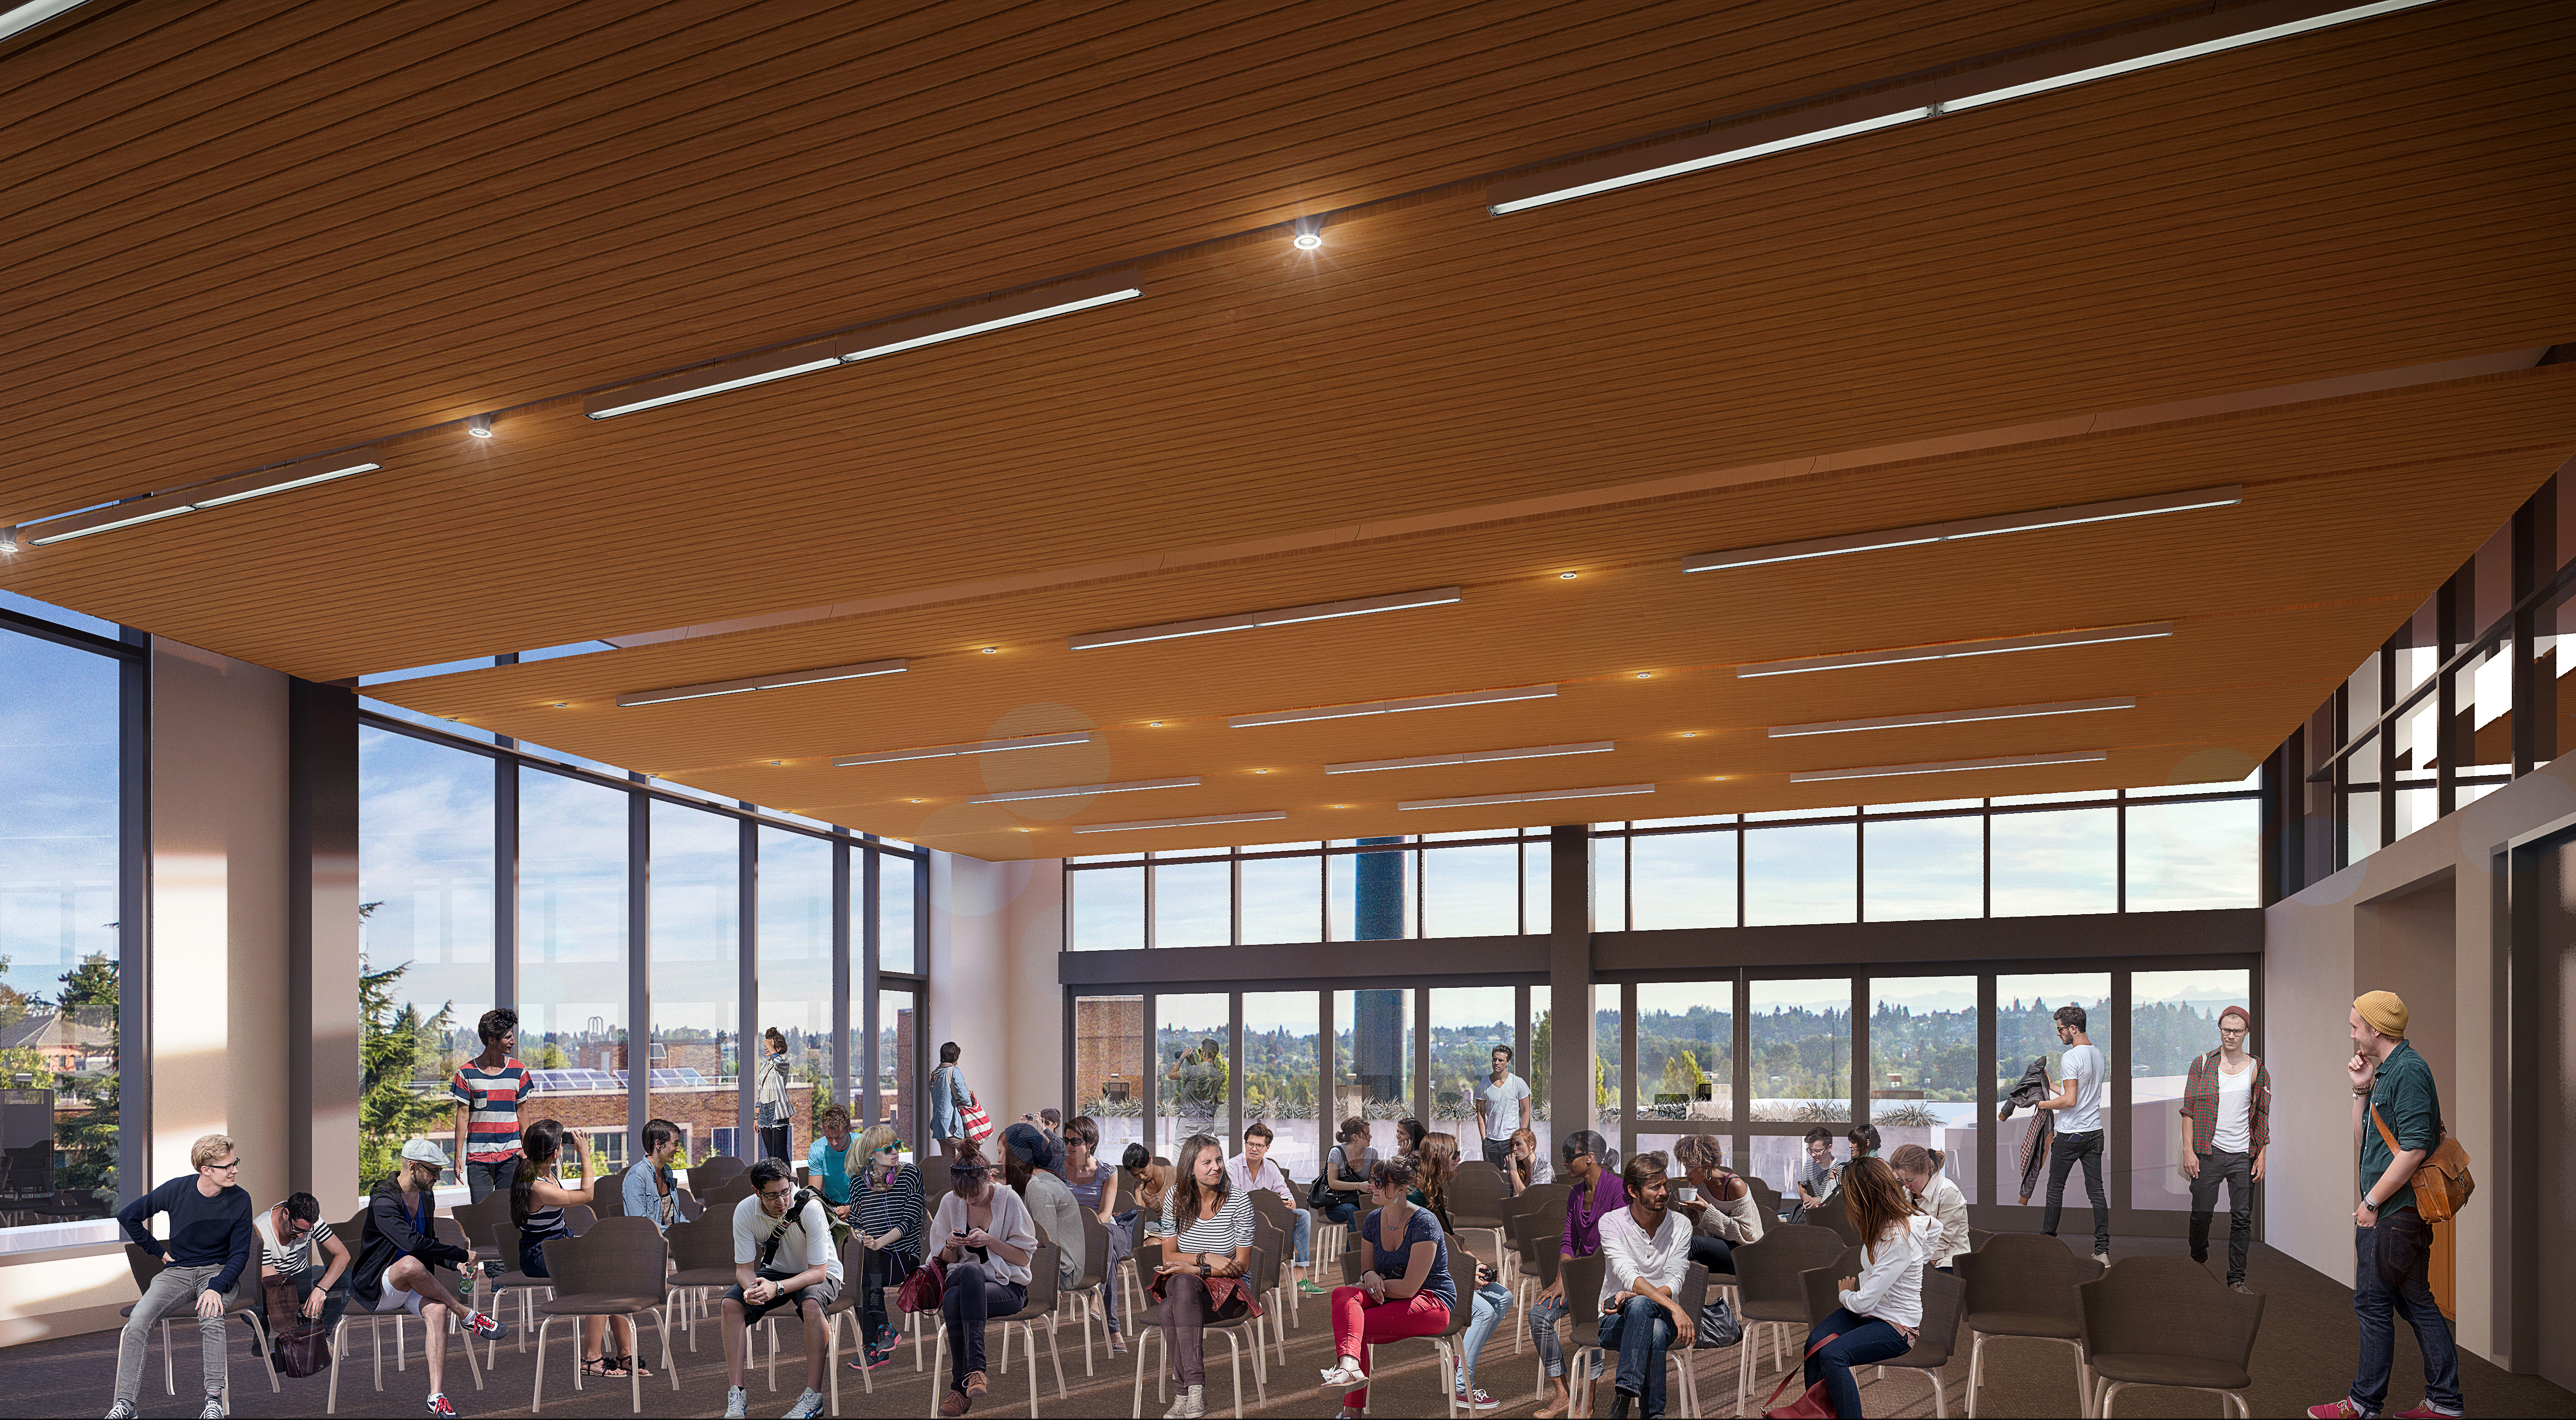 The 3,000-square-foot Zillow Commons in the new building will be a flexible events space 